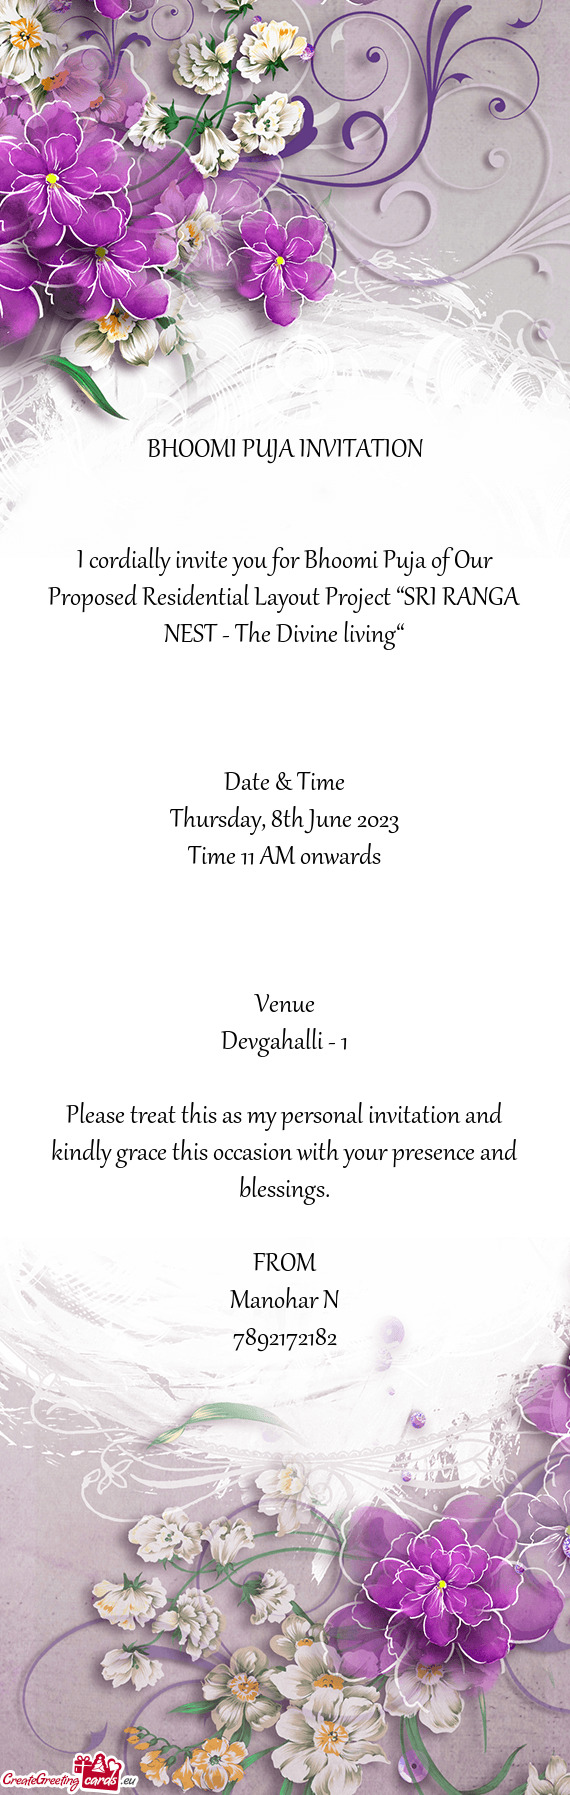 I cordially invite you for Bhoomi Puja of Our Proposed Residential Layout Project “SRI RANGA NEST